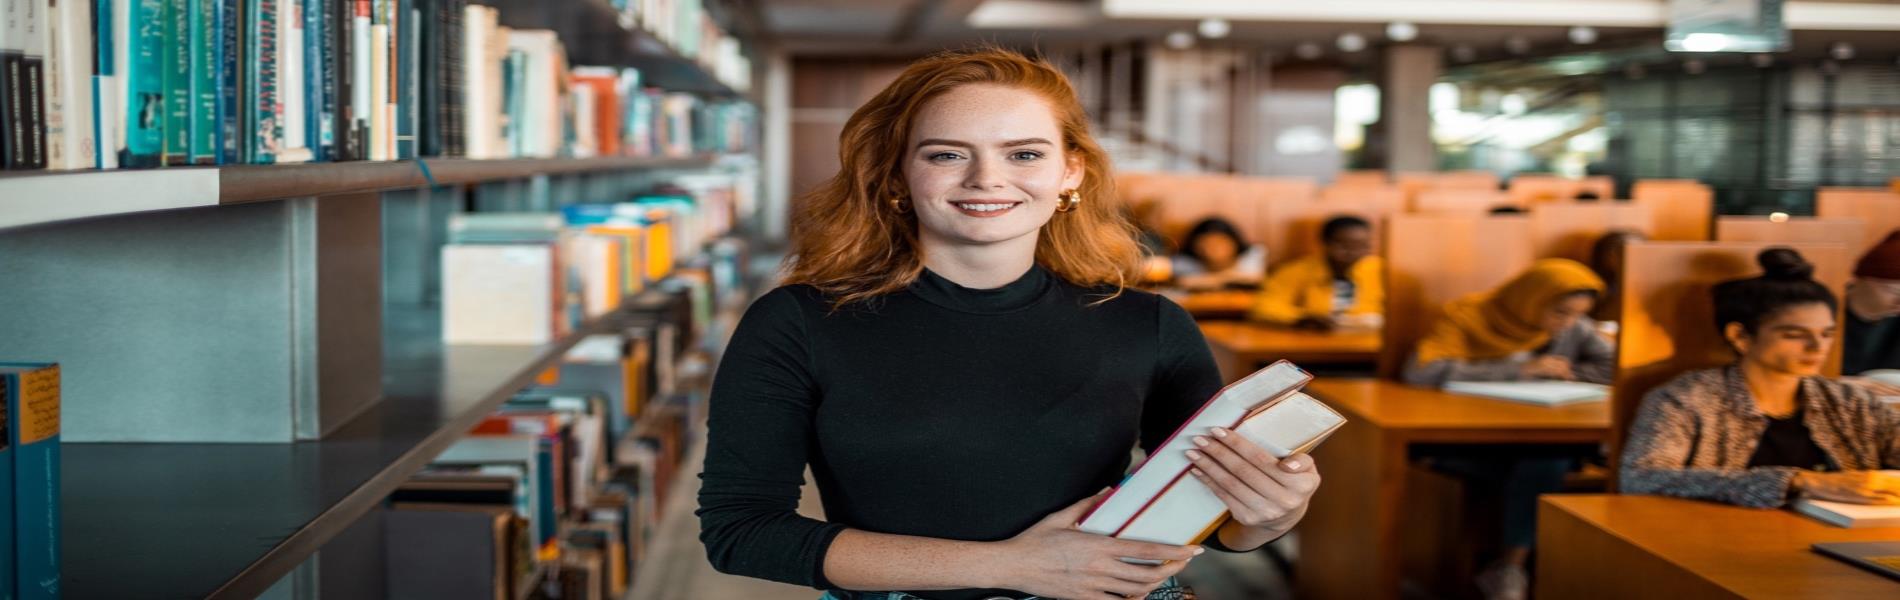 1900x600Girl in Library